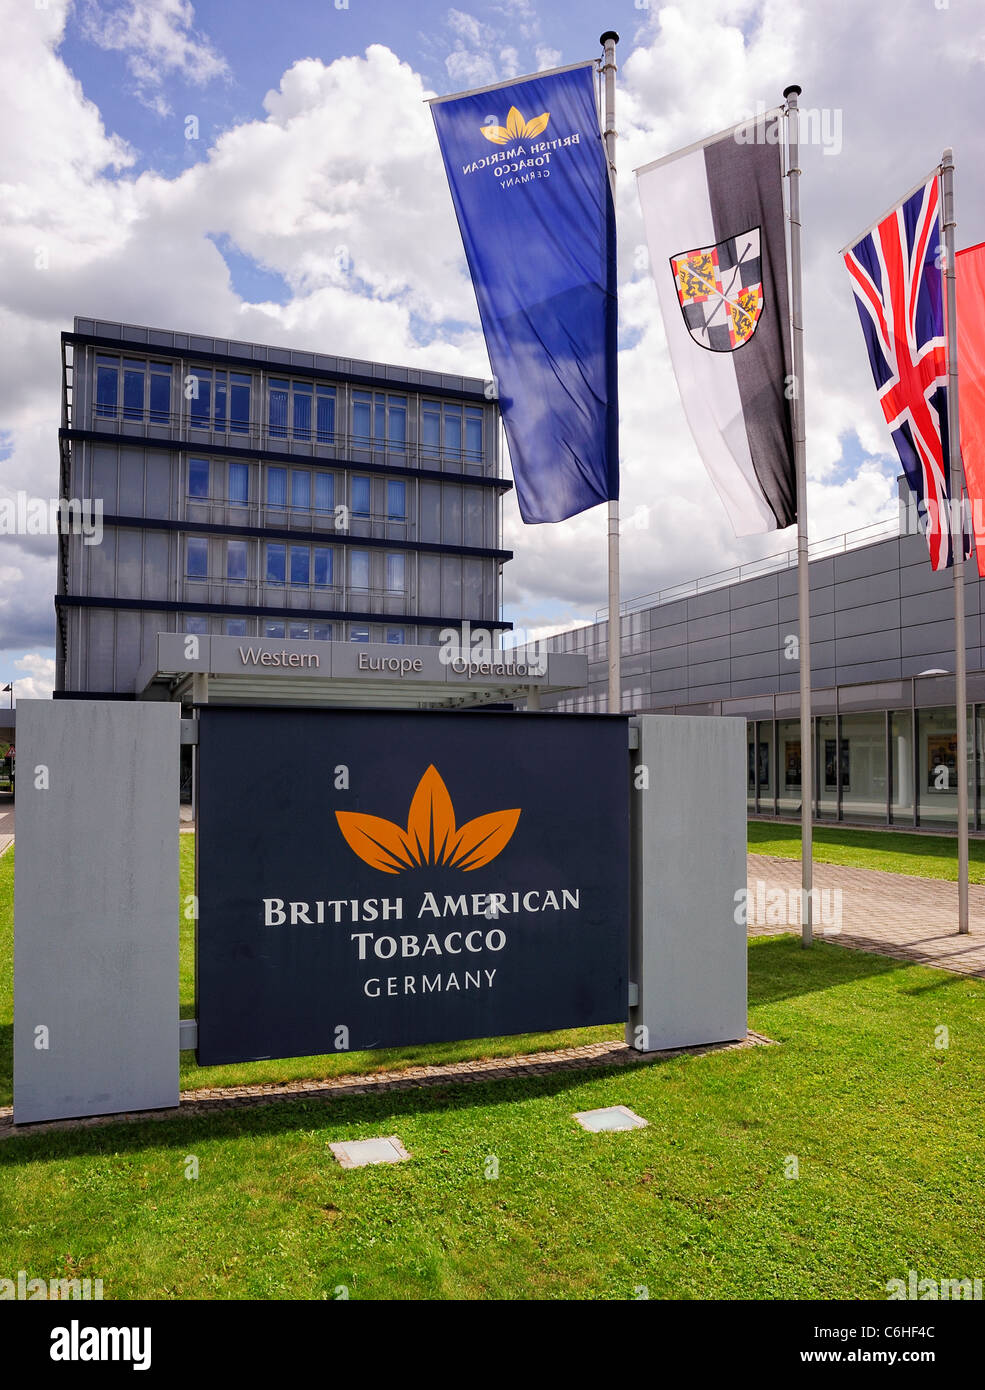 British American Tobacco (BAT) Western Europe Operations Office Germany in Bayreuth, Bavaria, Germany Stock Photo